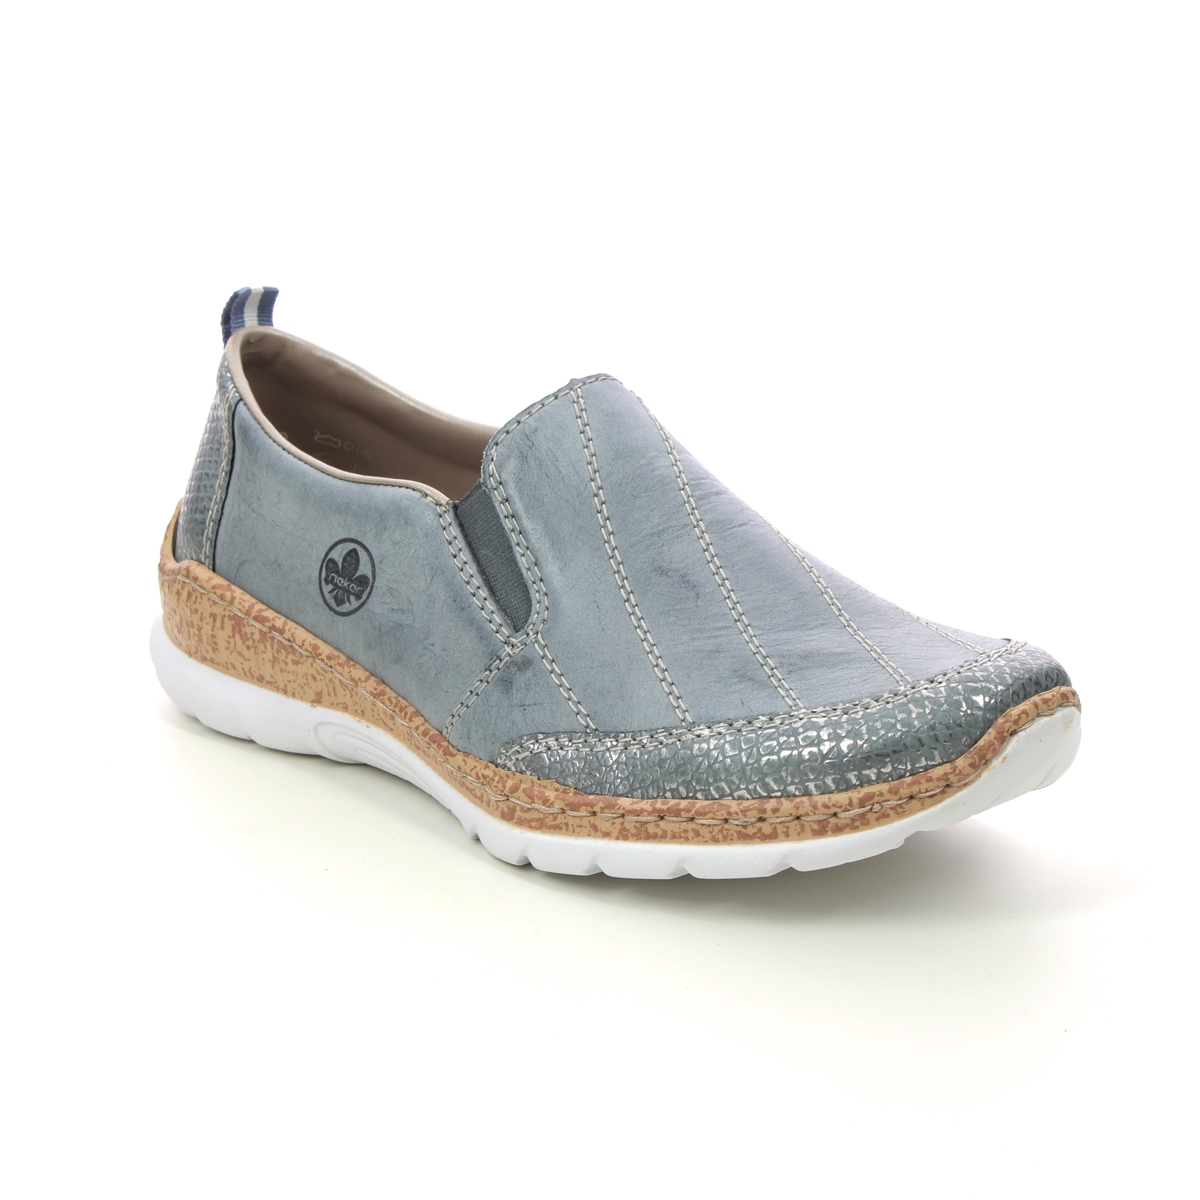 Rieker Empilucas Denim Leather Womens Comfort Slip On Shoes N4274-12 In Size 38 In Plain Denim Leather